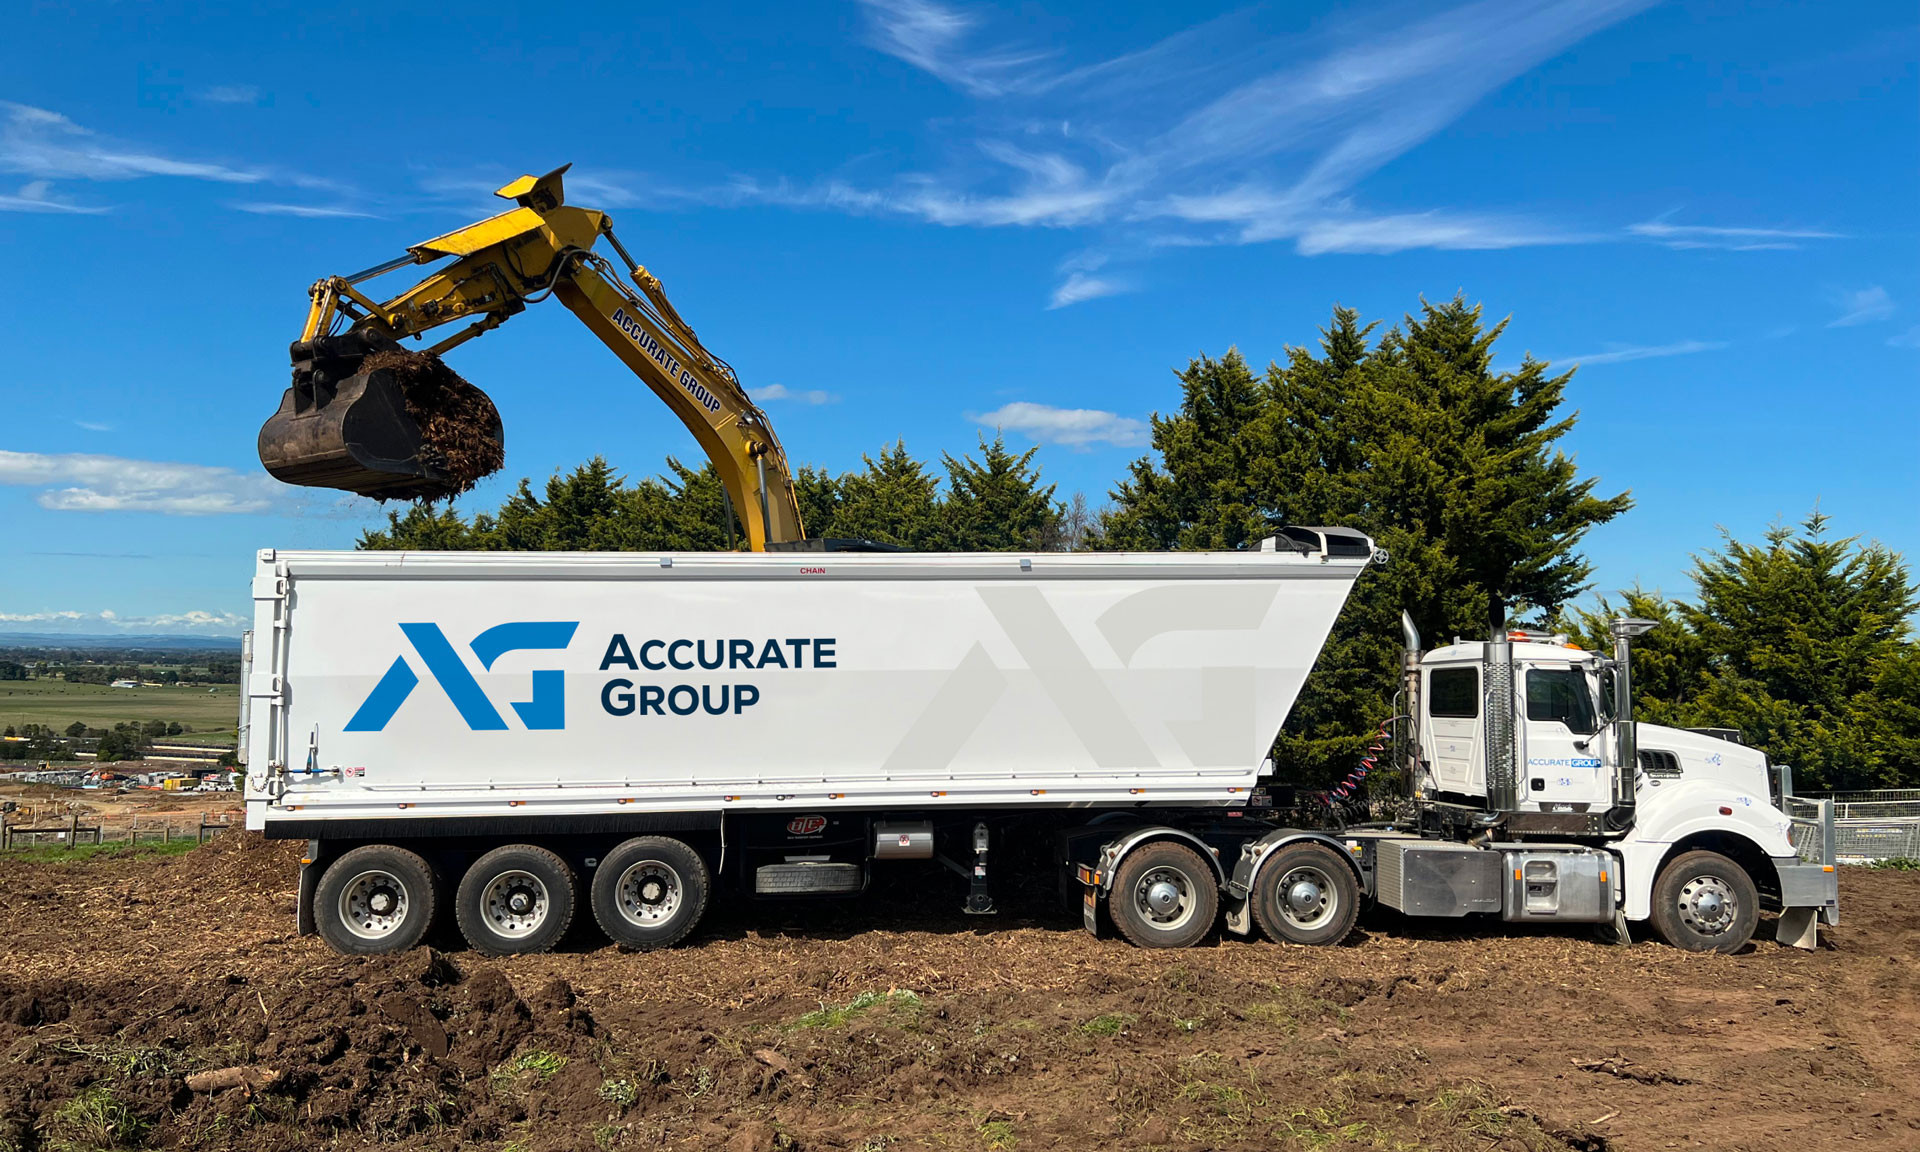 Accurate Group truck being filled with mulching